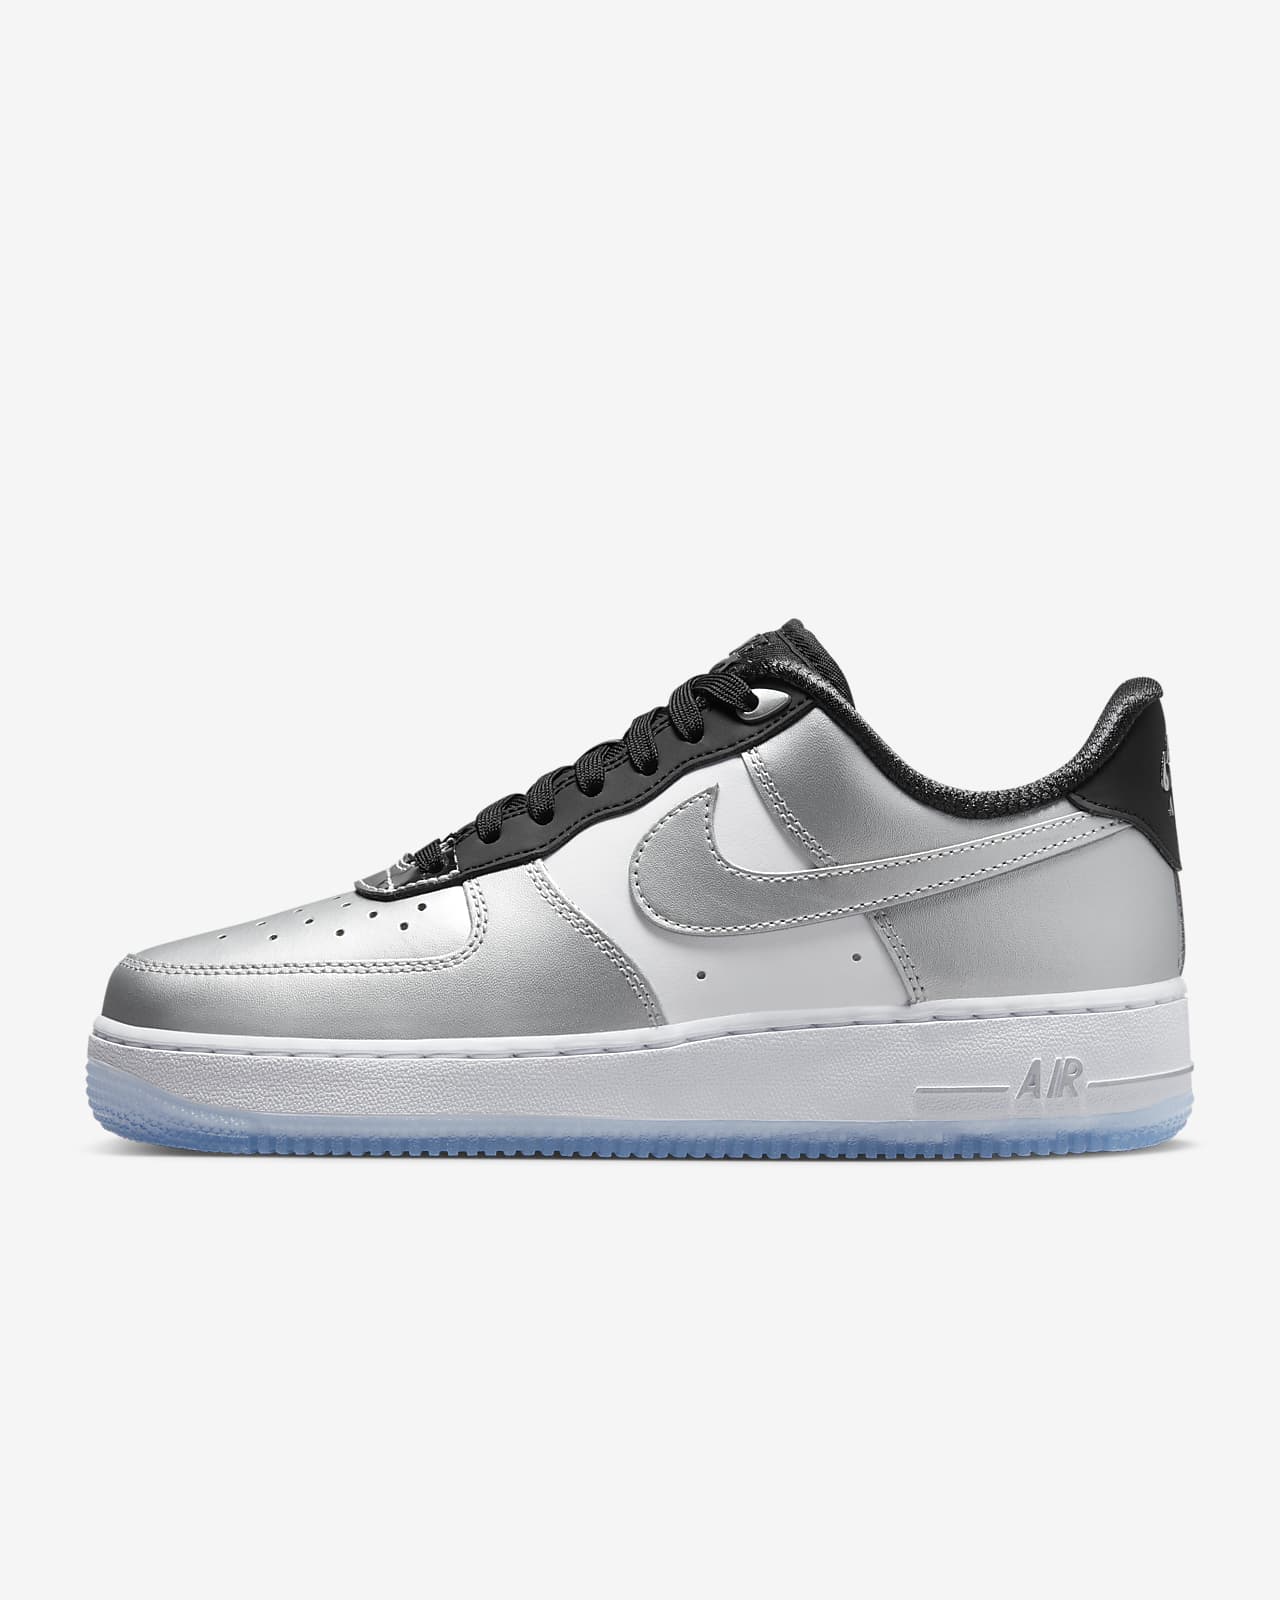 Nike Air Force 1 '07 SE Women's Shoes Size 9 (Grey)